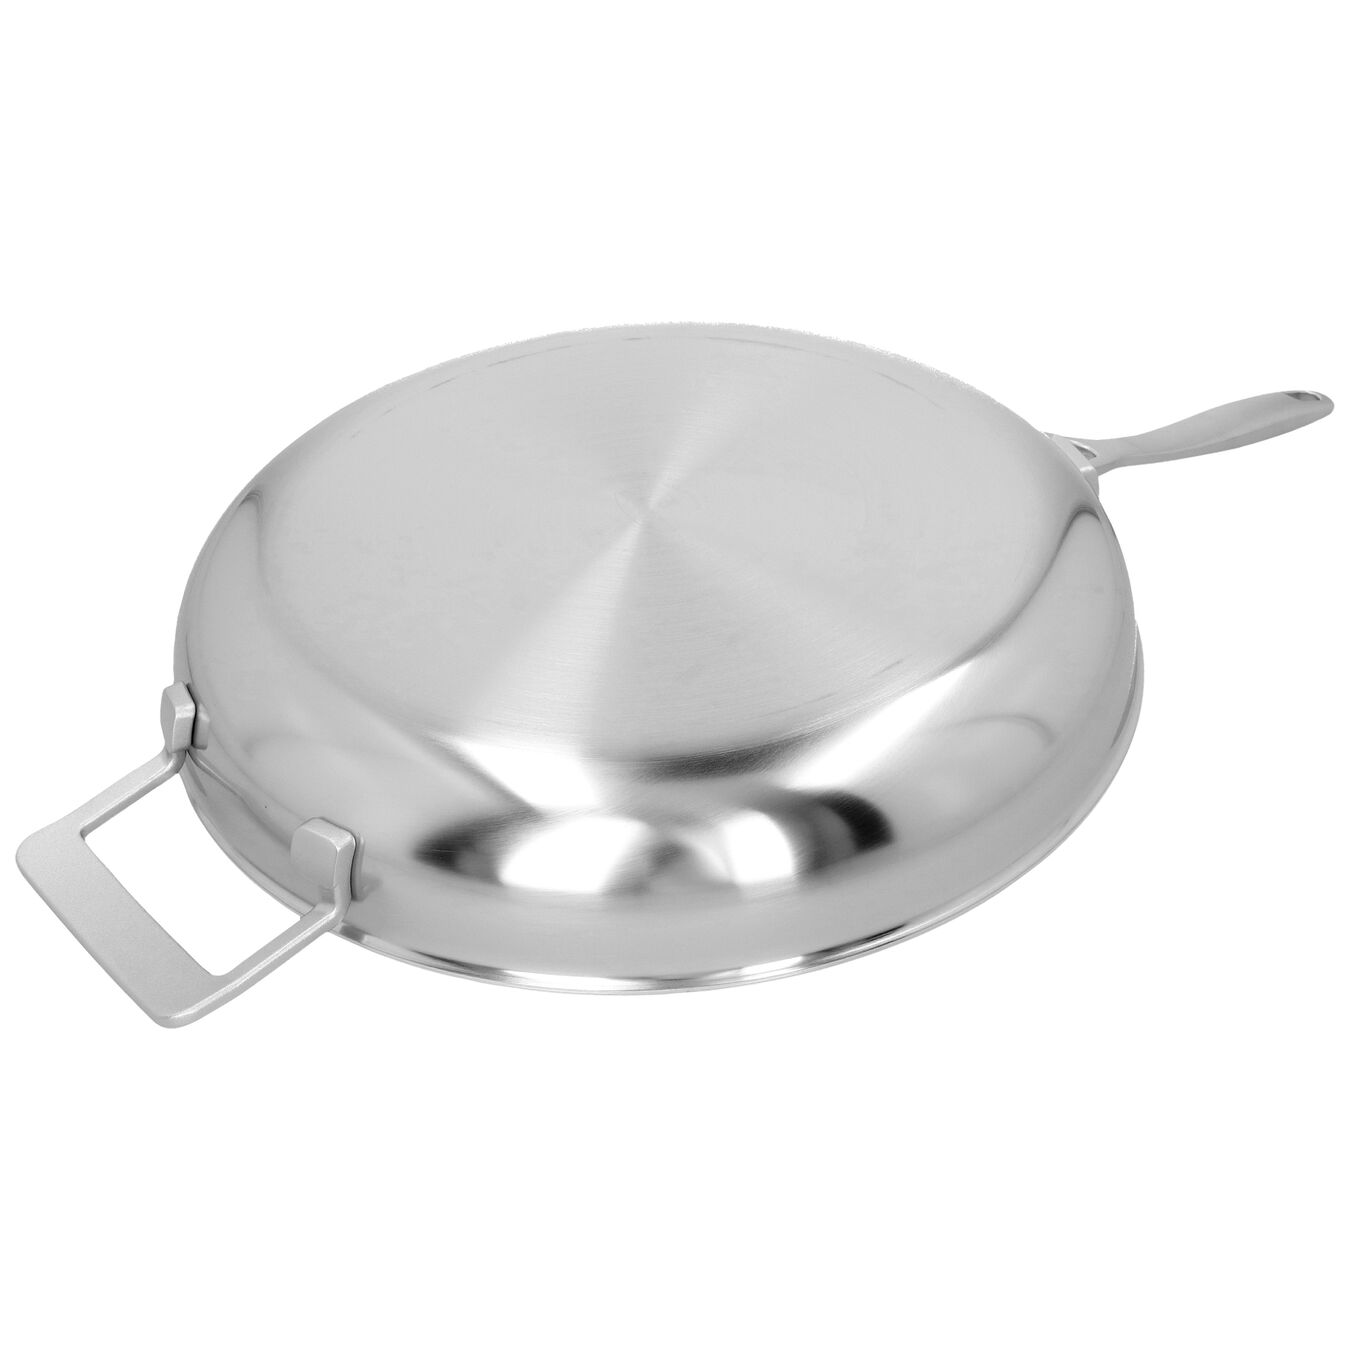 32 cm / 12.5 inch 18/10 Stainless Steel Frying pan,,large 4